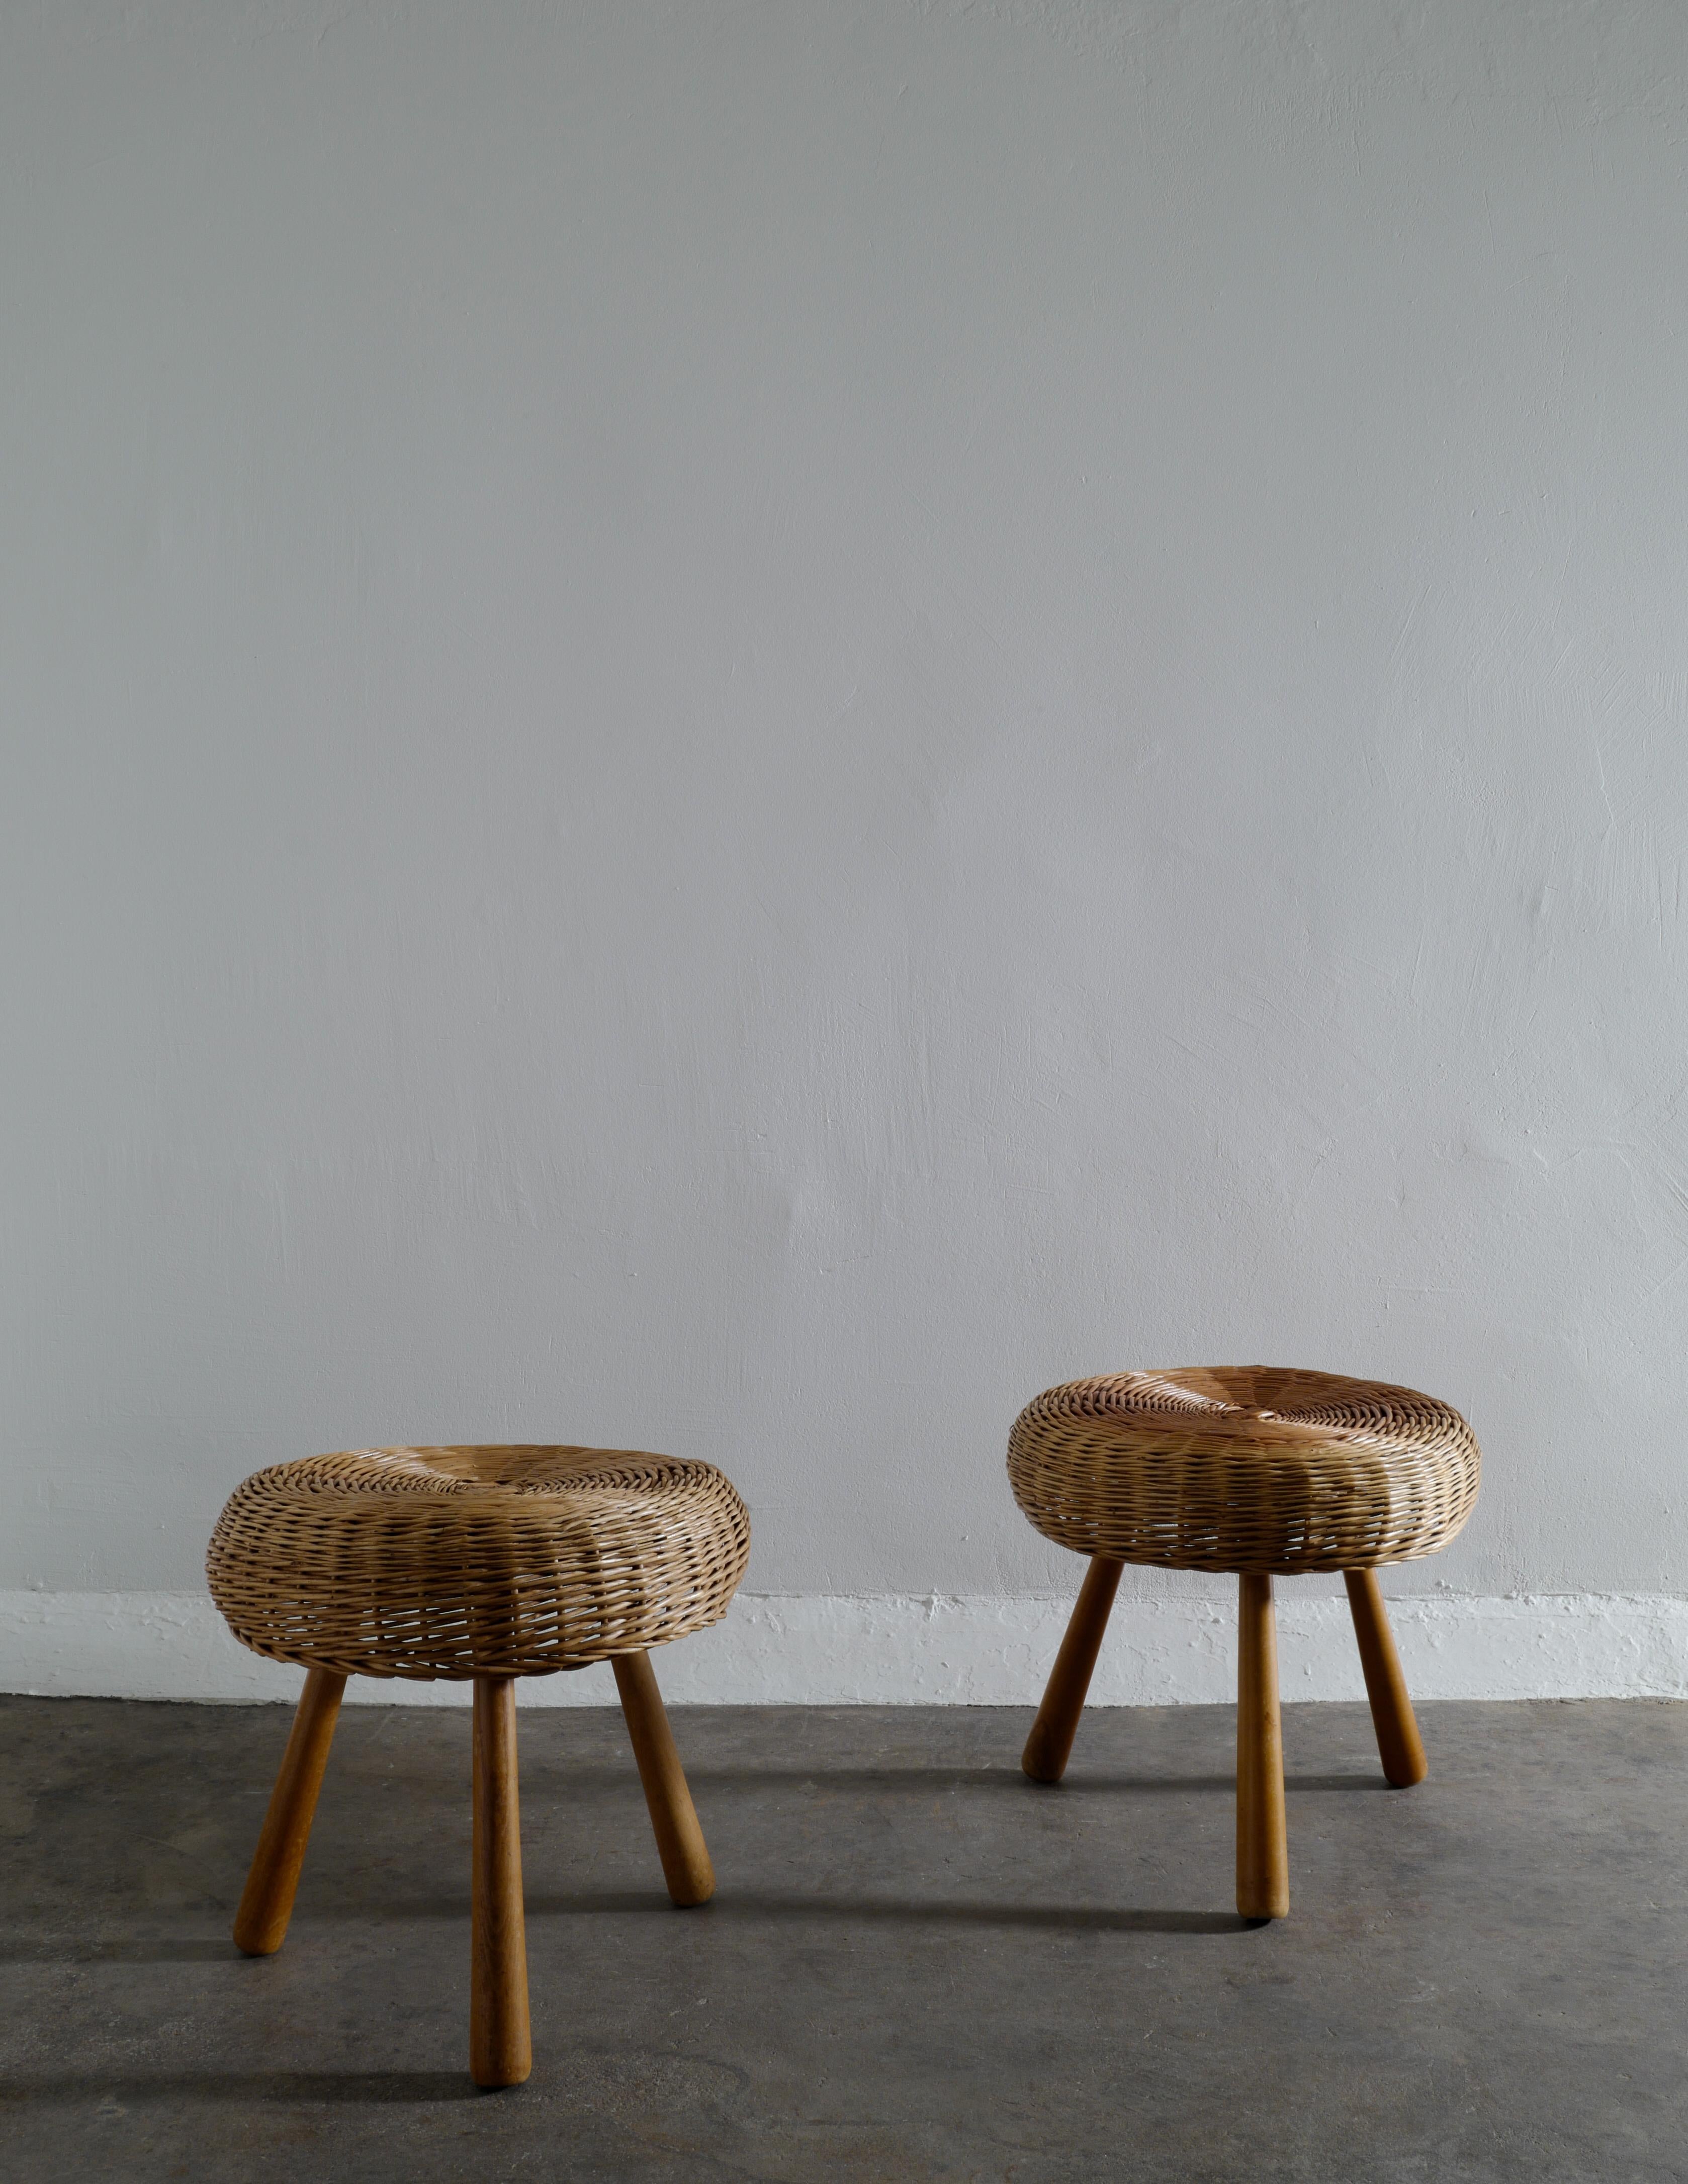 Rare pair of mid-century cane / rattan stools in beech in style of Tony Paul produced in Denmark 1960s. In good vintage and original condition with minimal signs of age and use. 

Dimensions: height: 42 cm, diameter: 46 cm.